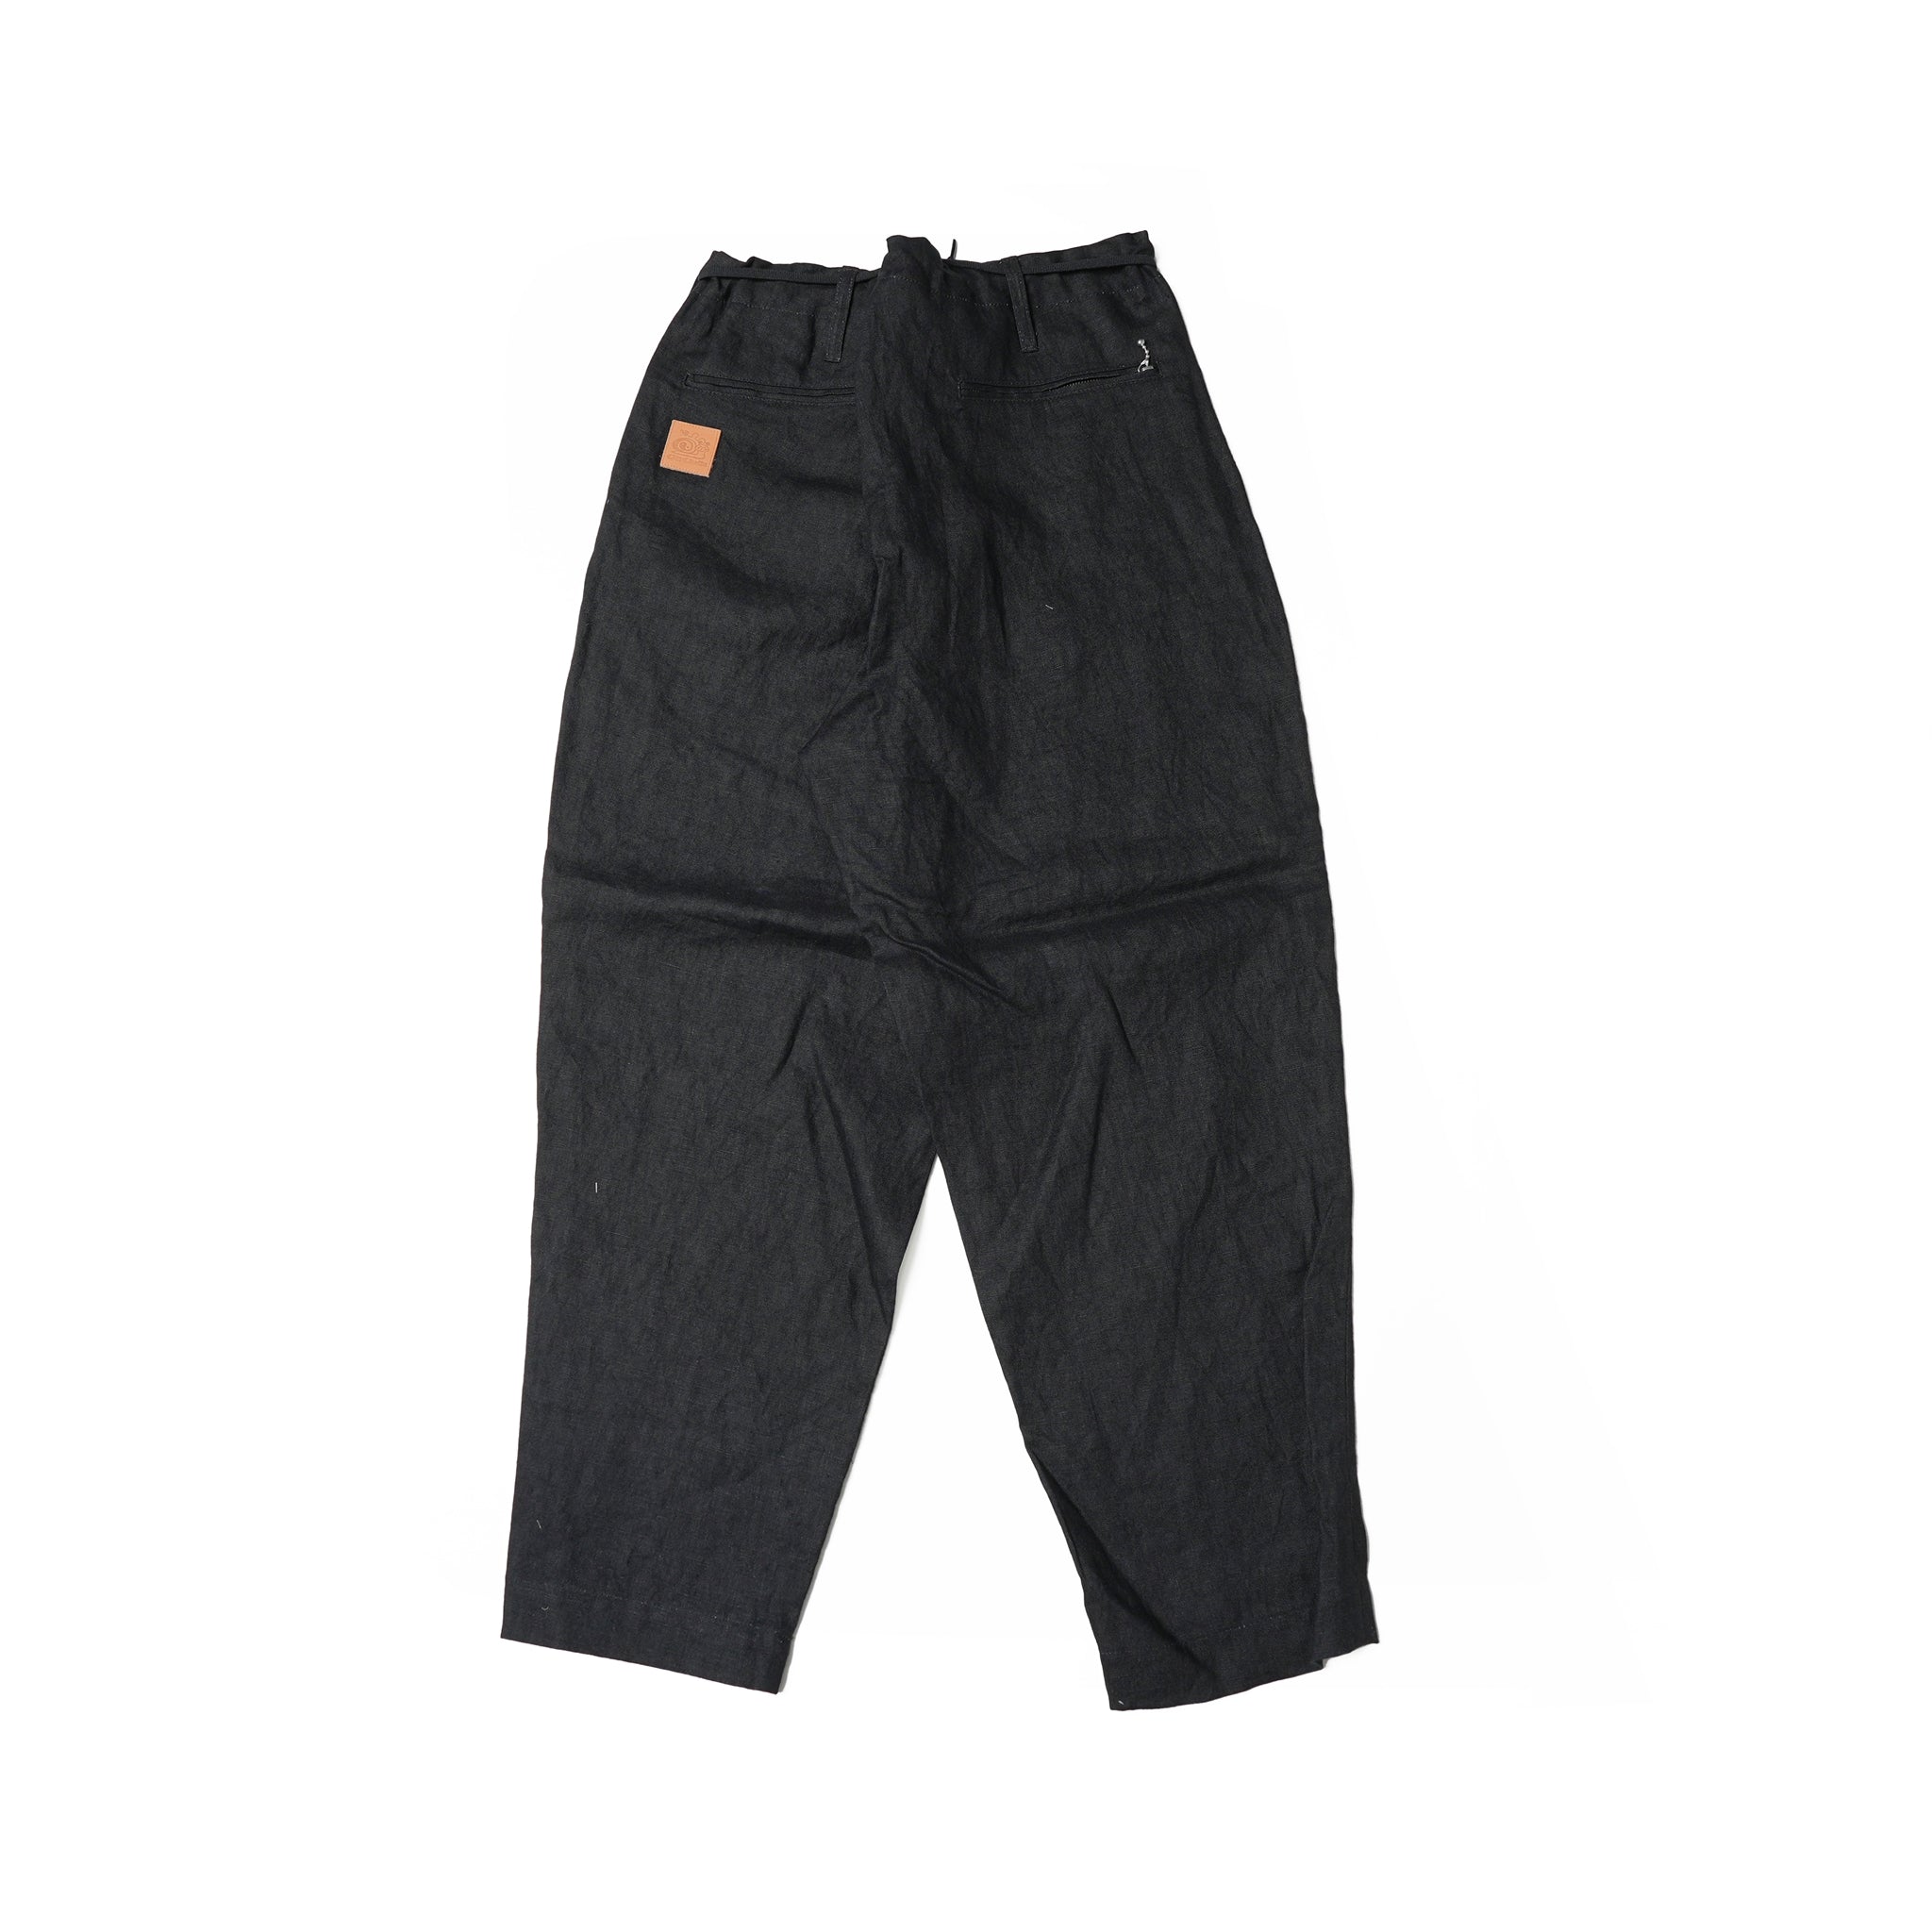 Name: Non-Elastic E-Z Pants Dead Stock Fabric Collection | Color:Black | Size: One Fits All 【CITYLIGHTS PRODUCTS_シティライツプロダクツ】